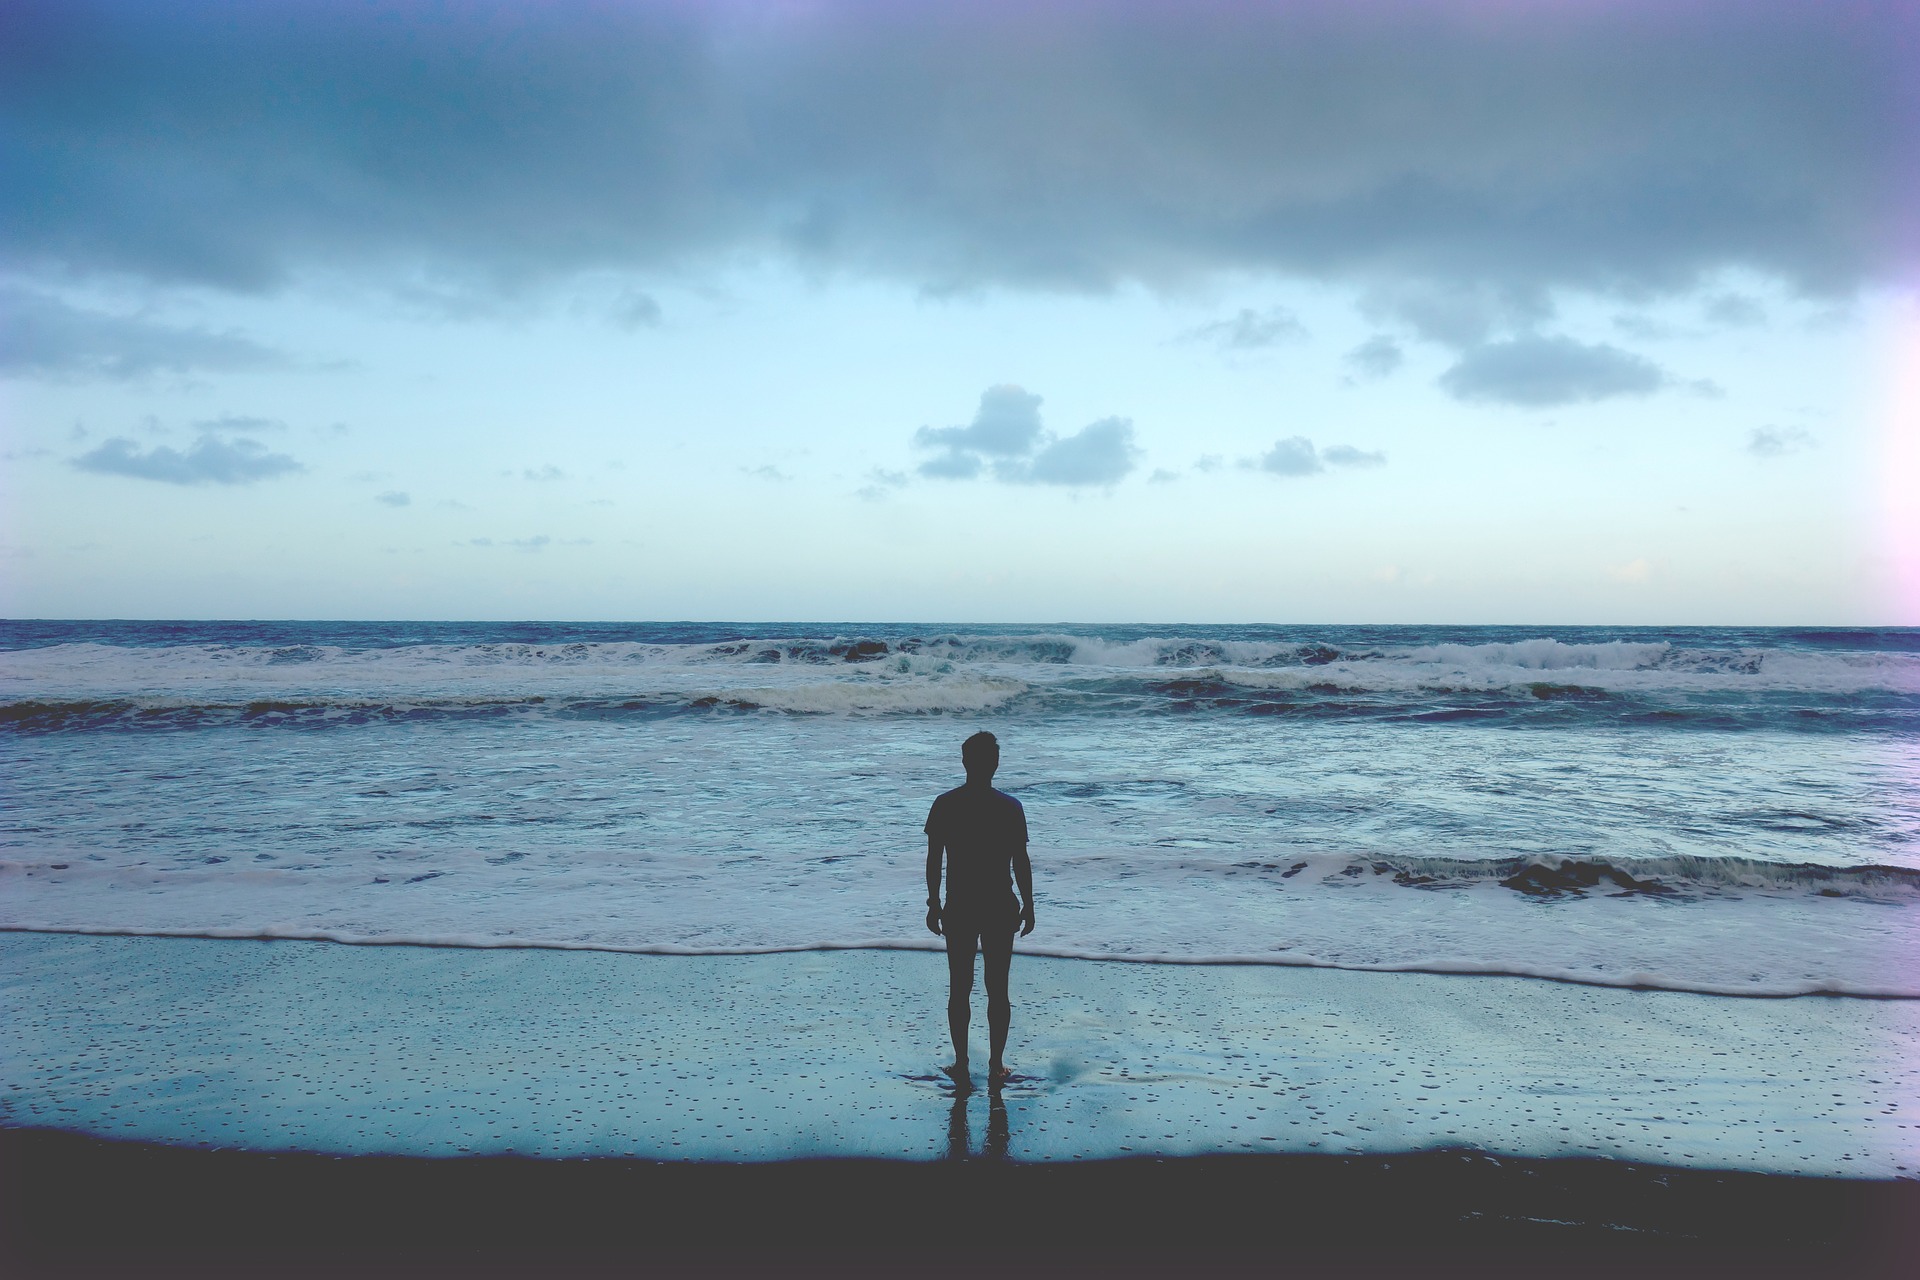 A person standing on the beach looking out at the ocean.